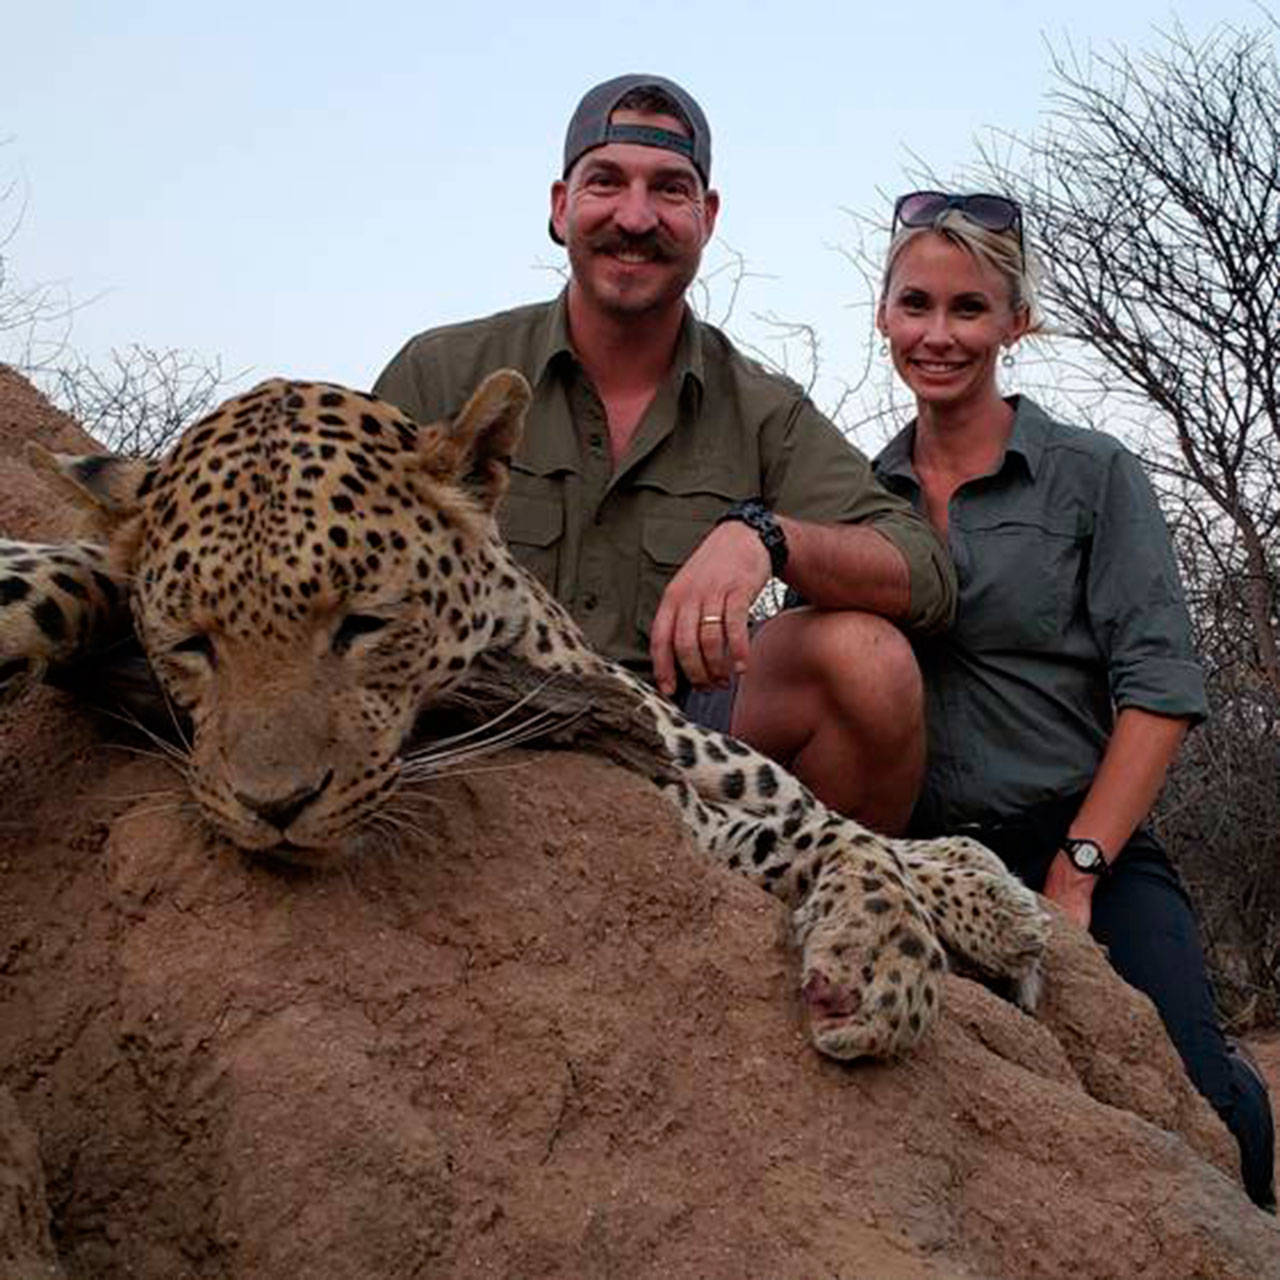 Idaho Fish and Game official draws heat for posing with animals he killed on African safari